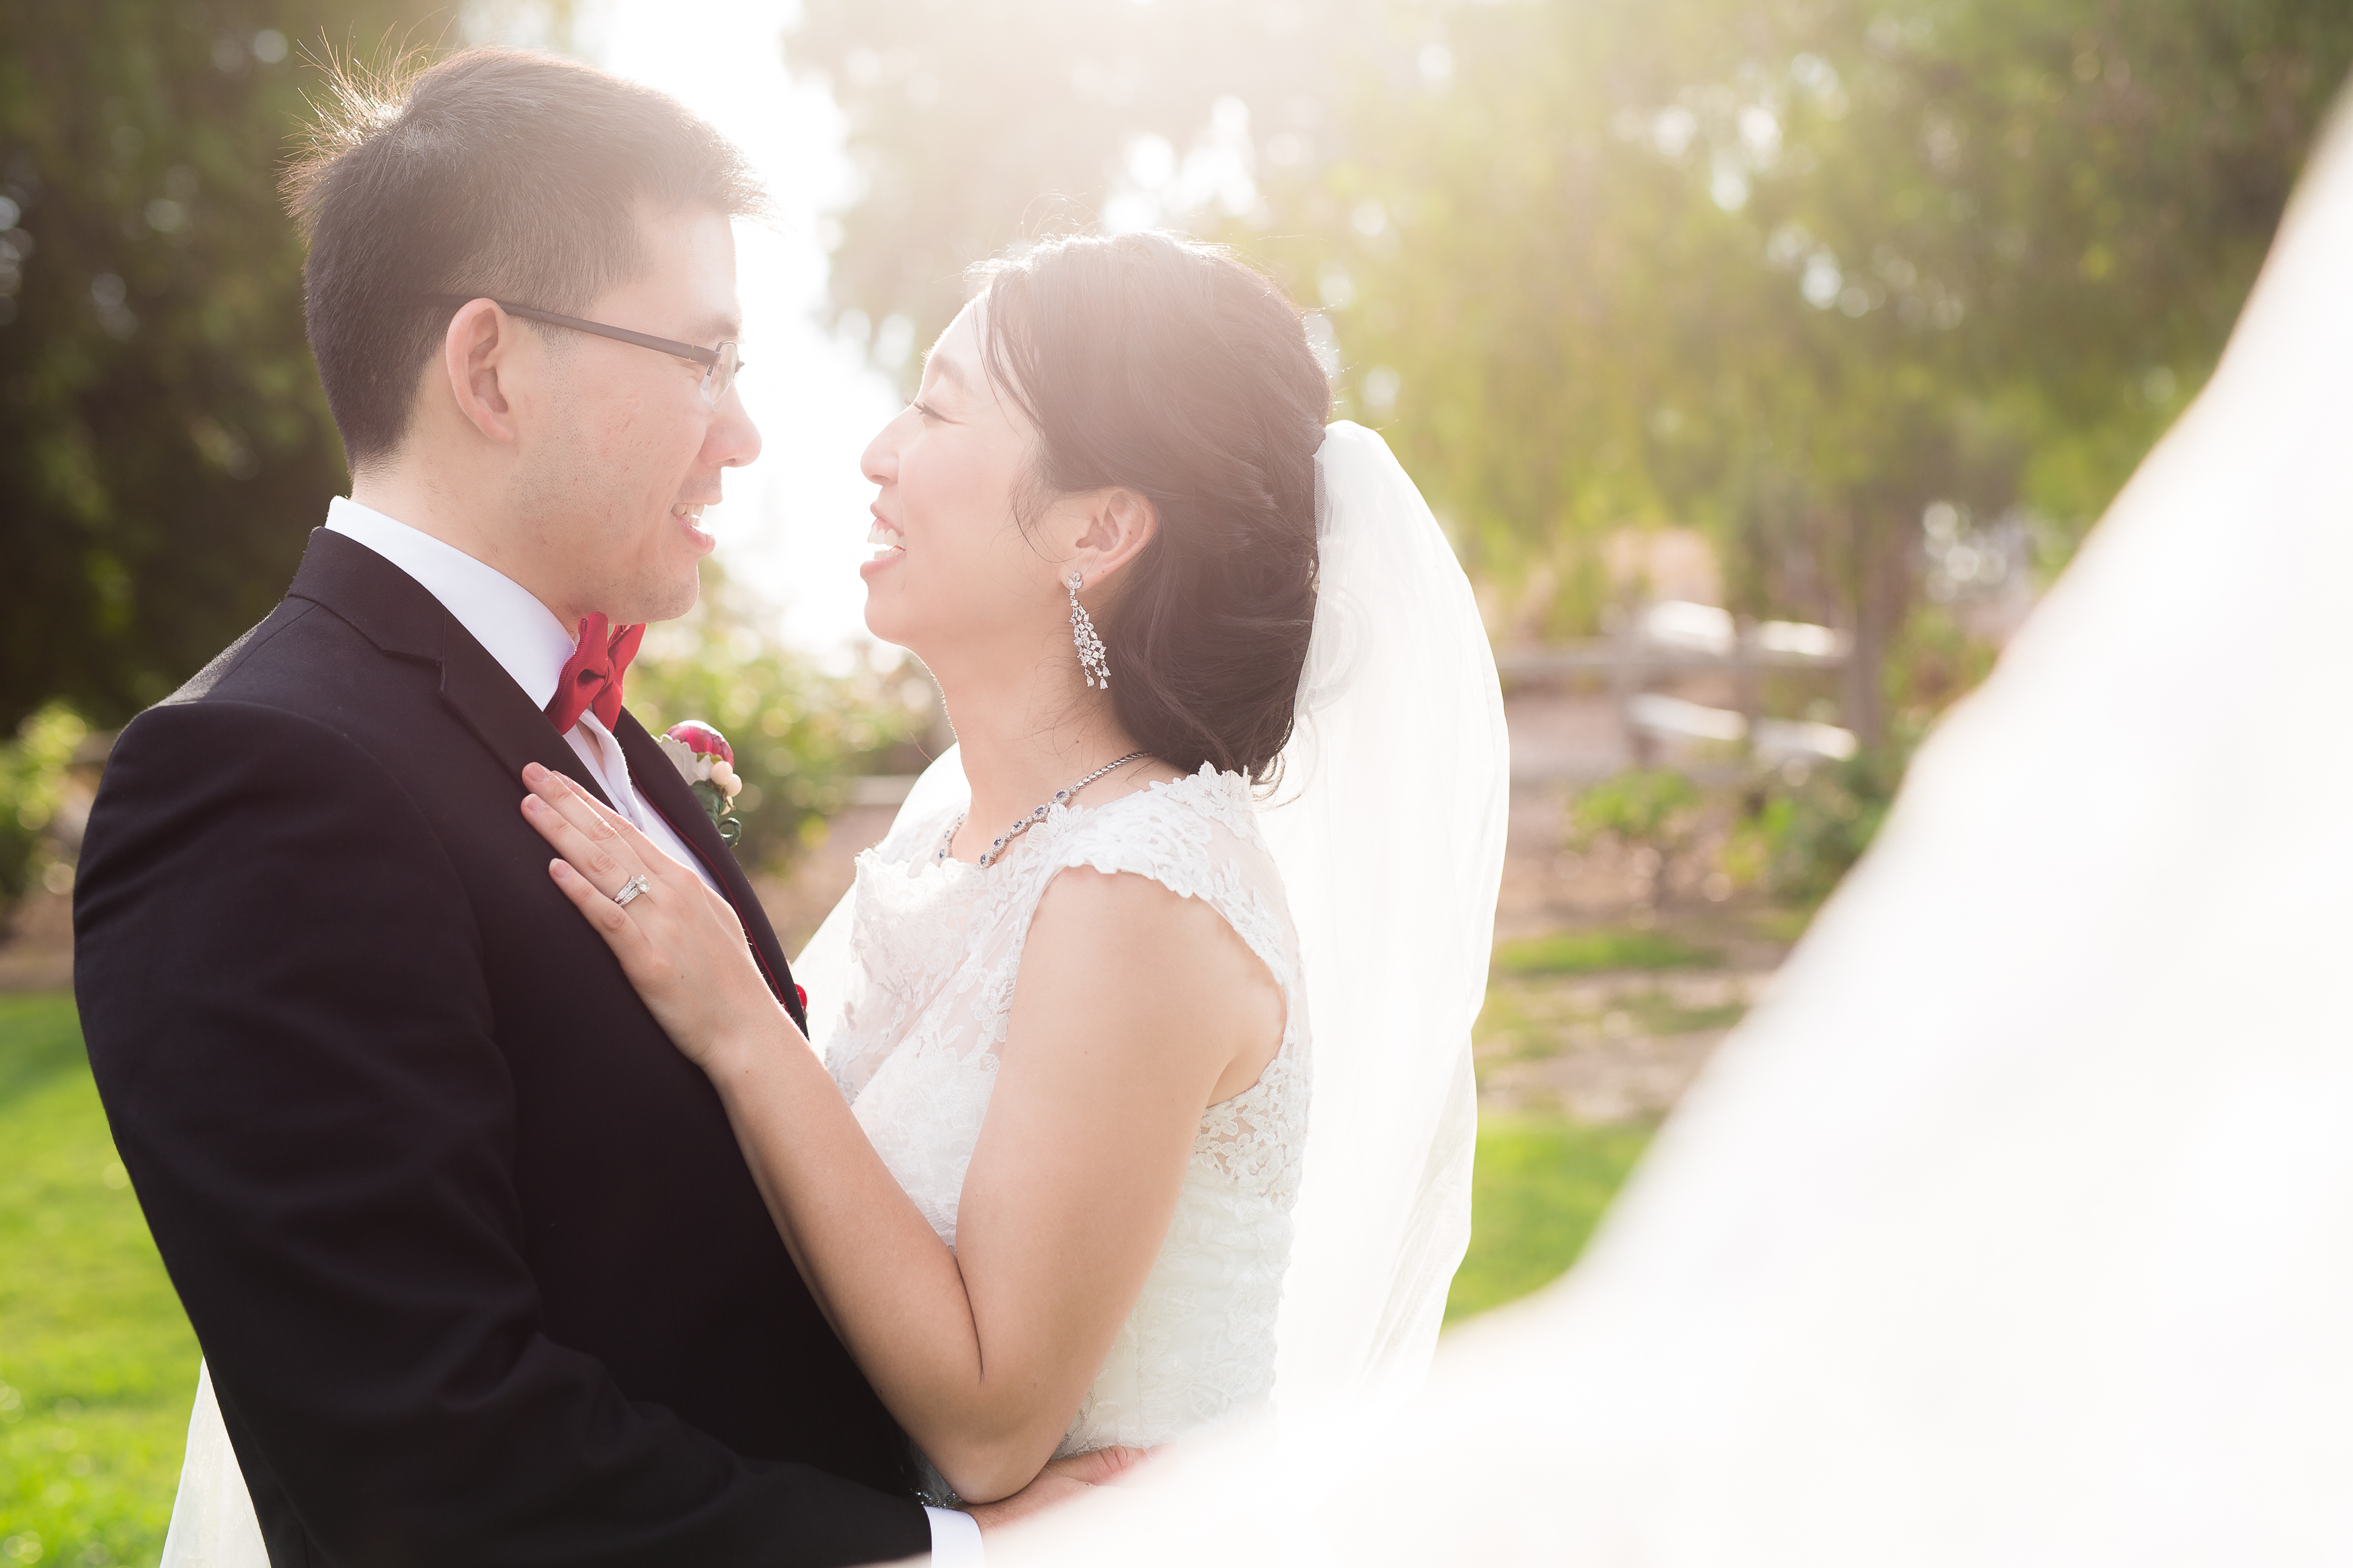 Wedding couple laughing at each other behind floating veil